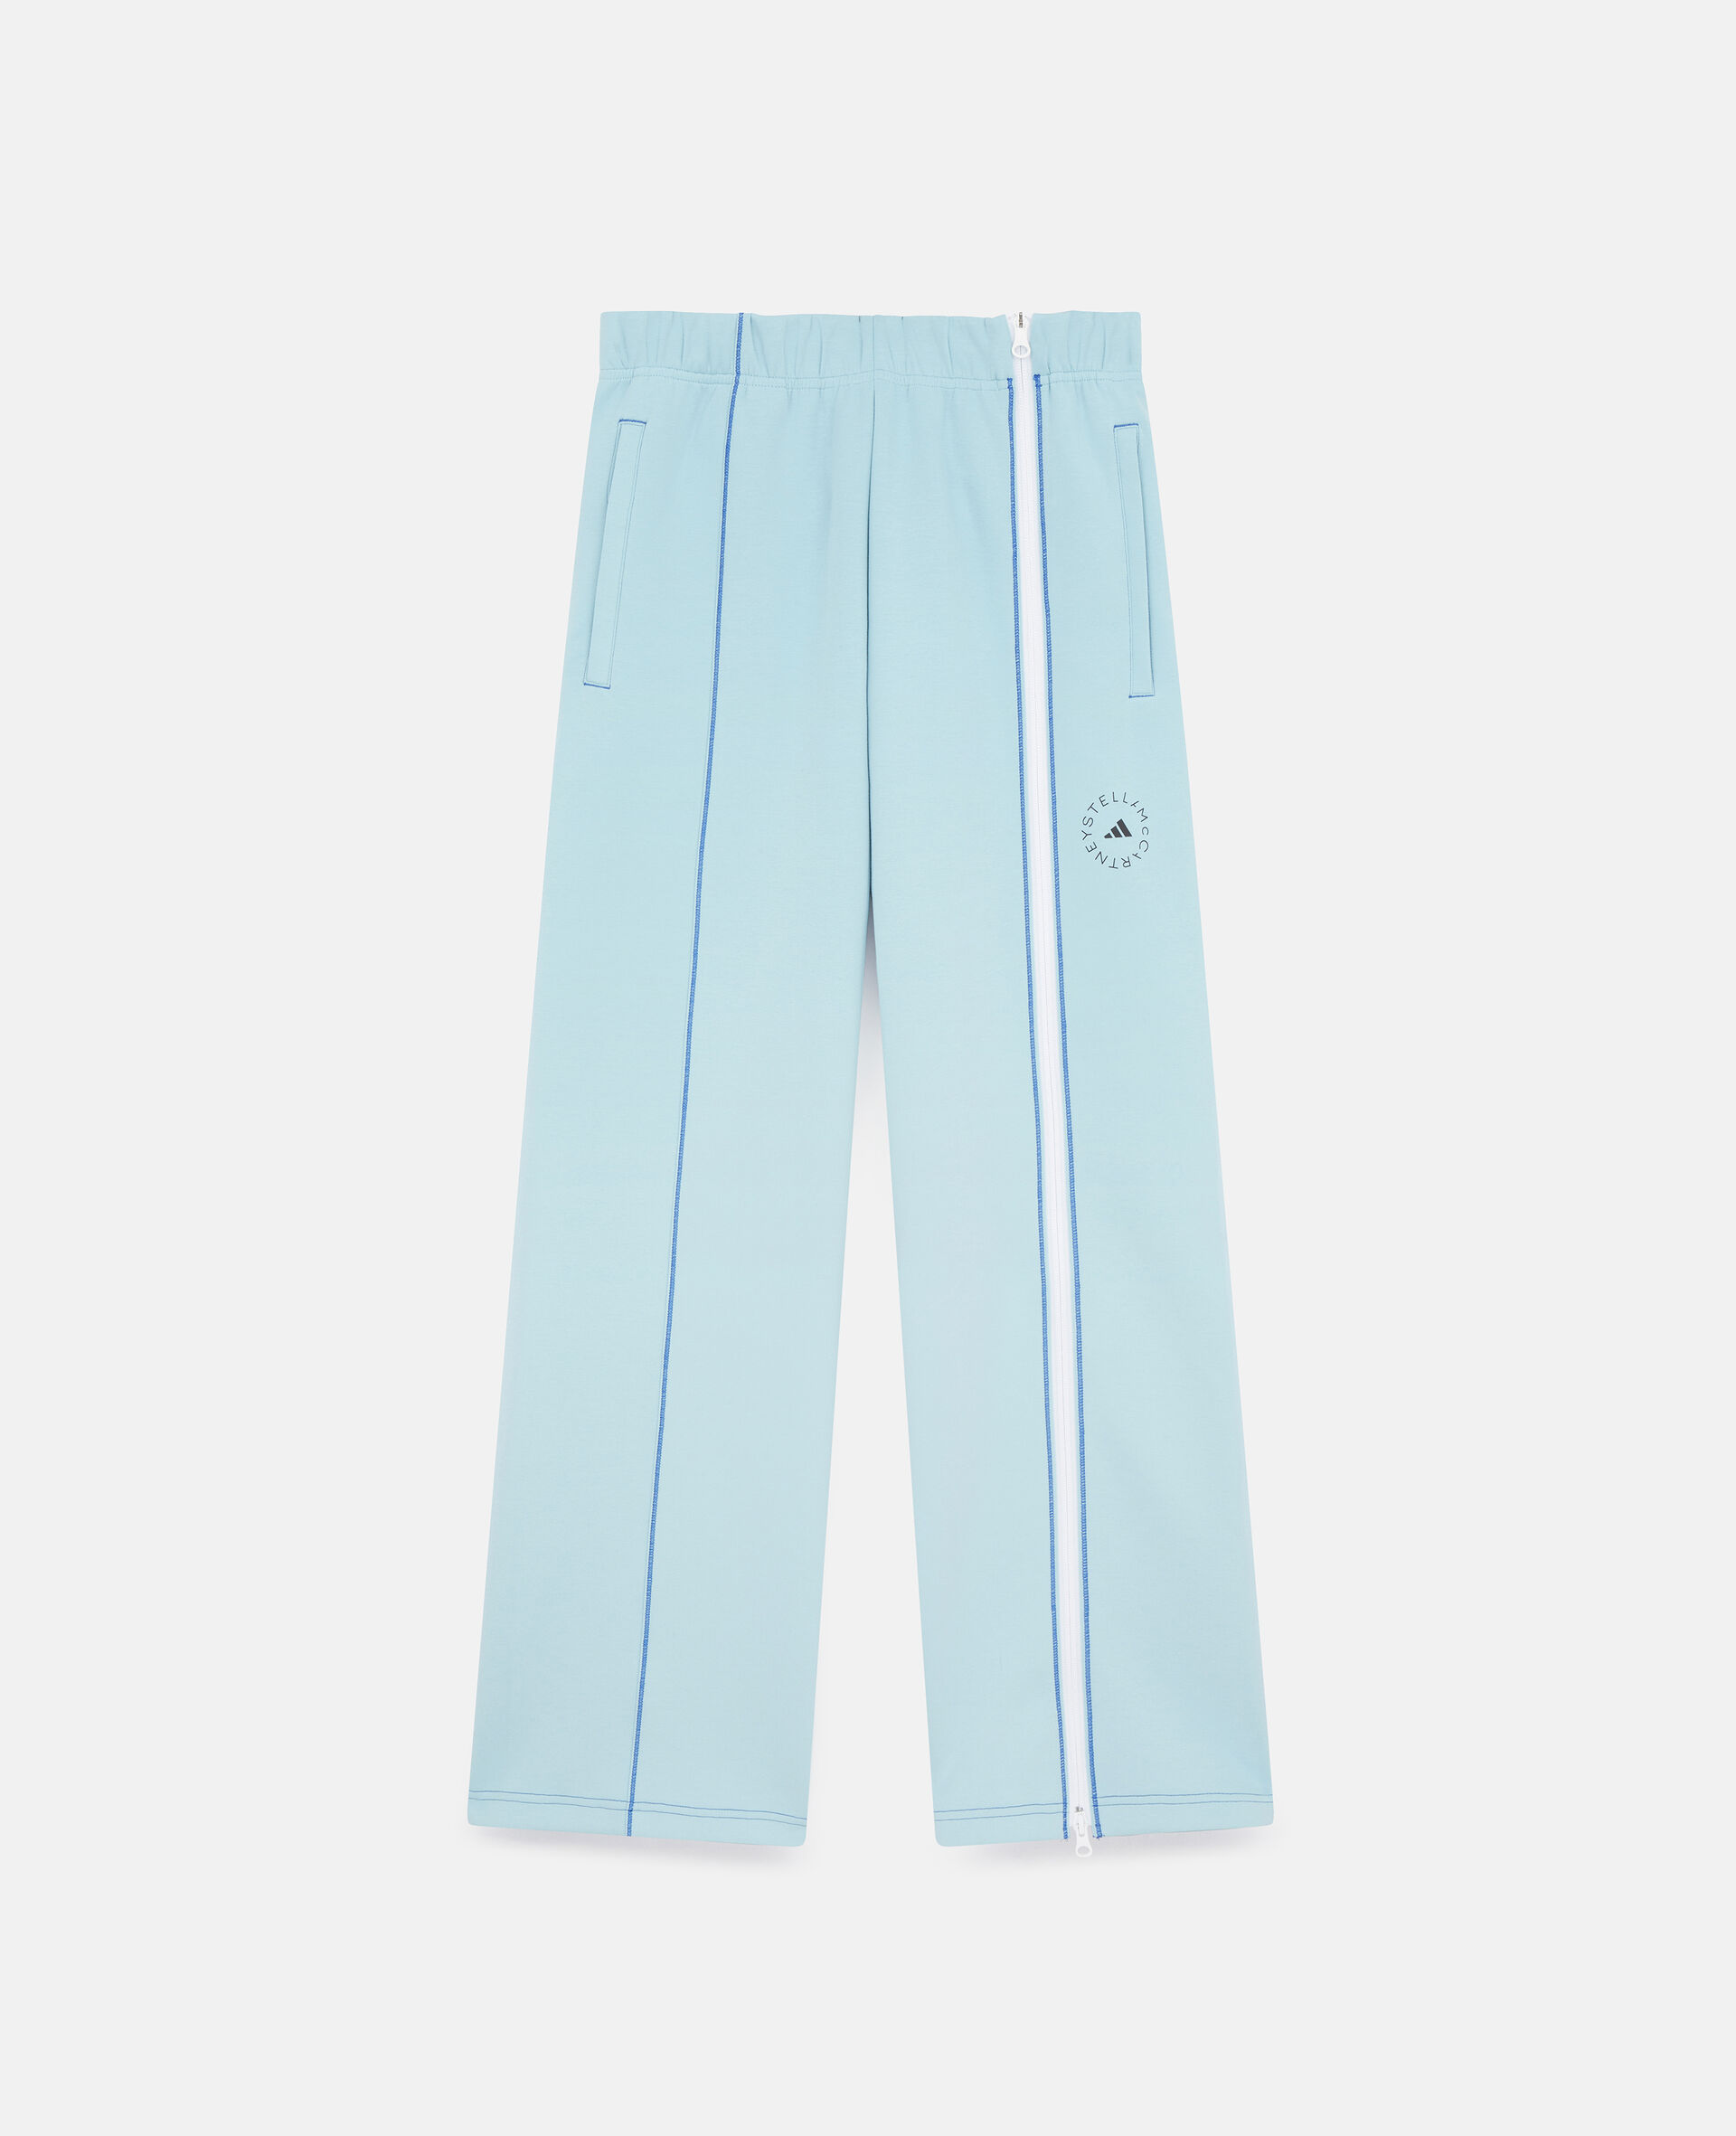 Sportswear Trackpant-Blue-large image number 0